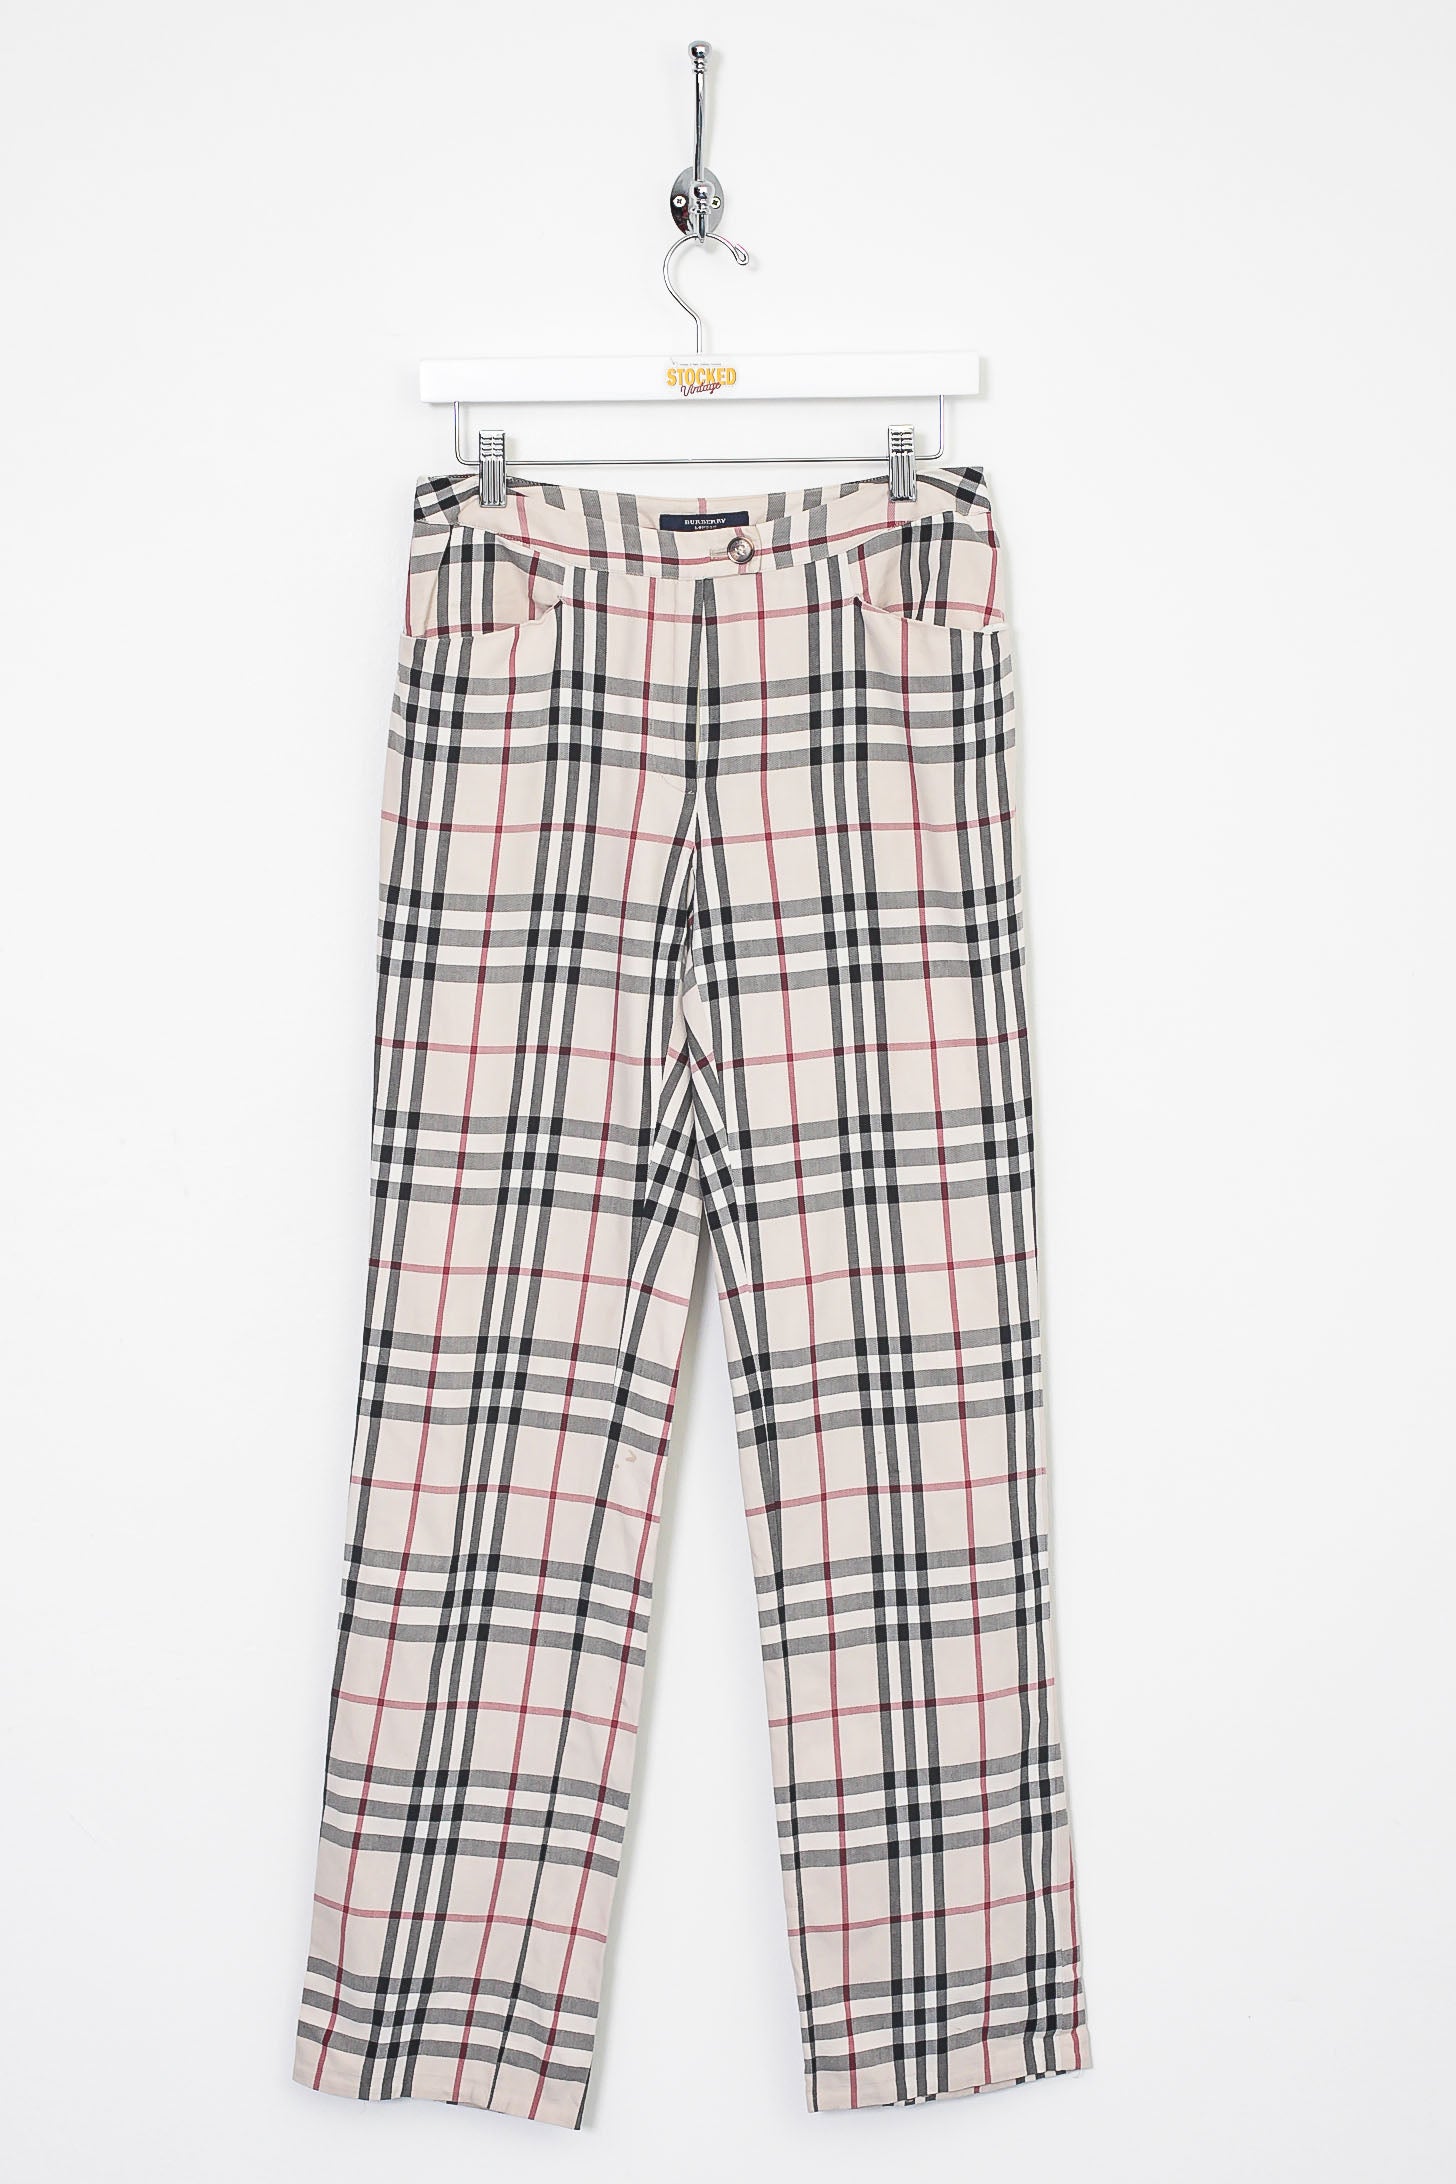 Burberry Louane Side Stripe Vintage Check Trousers  Neiman Marcus